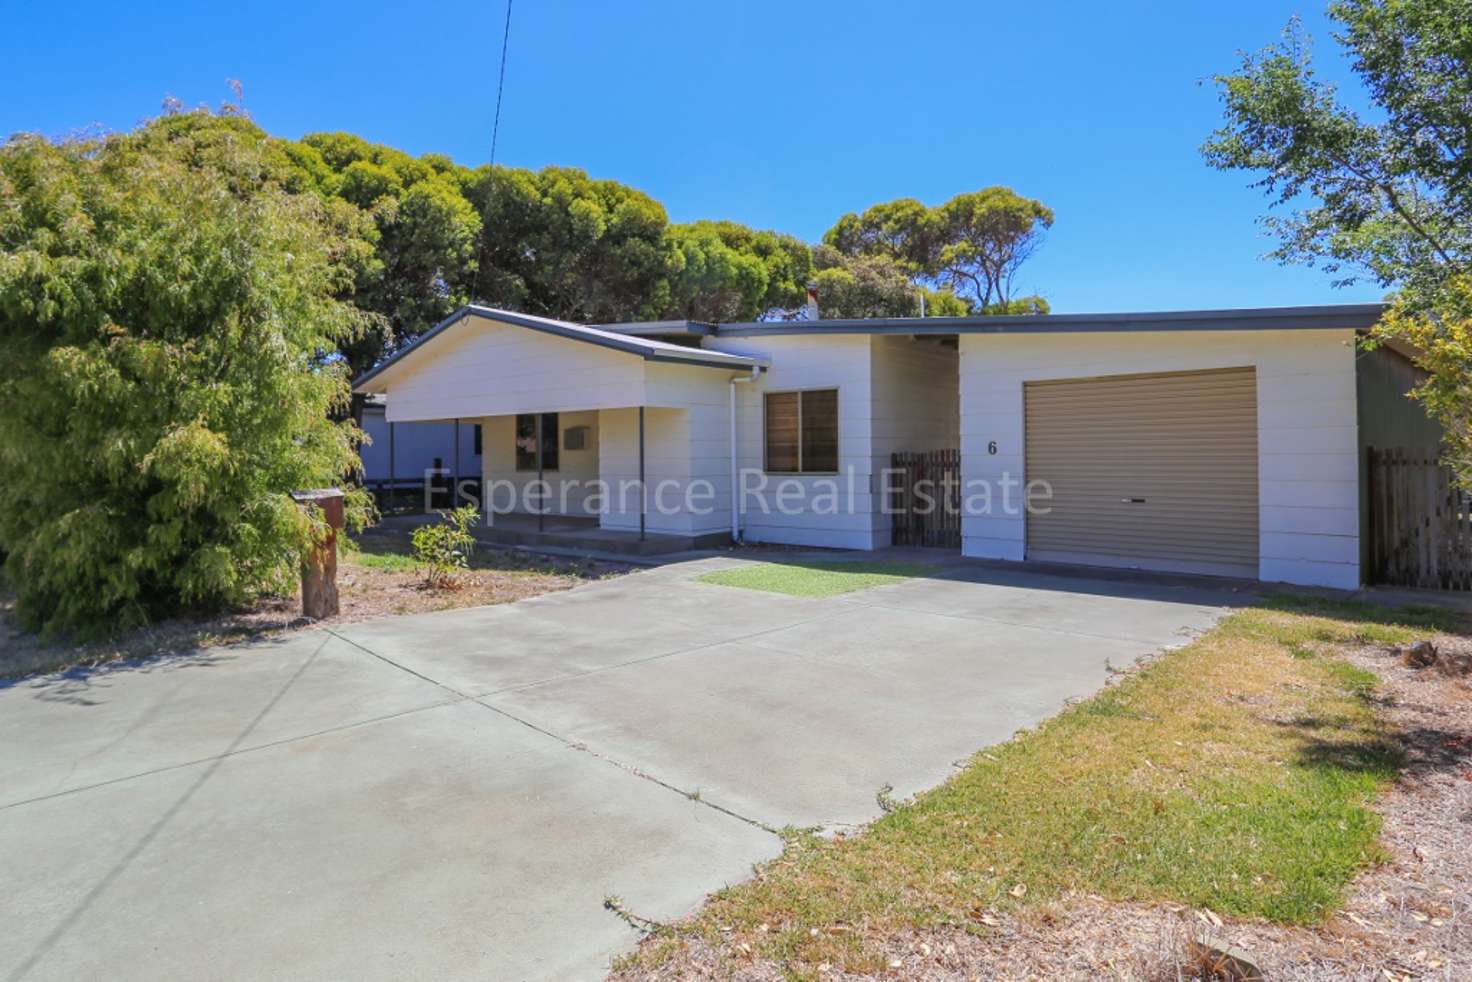 Main view of Homely house listing, 6 Stubbs Street, Esperance WA 6450